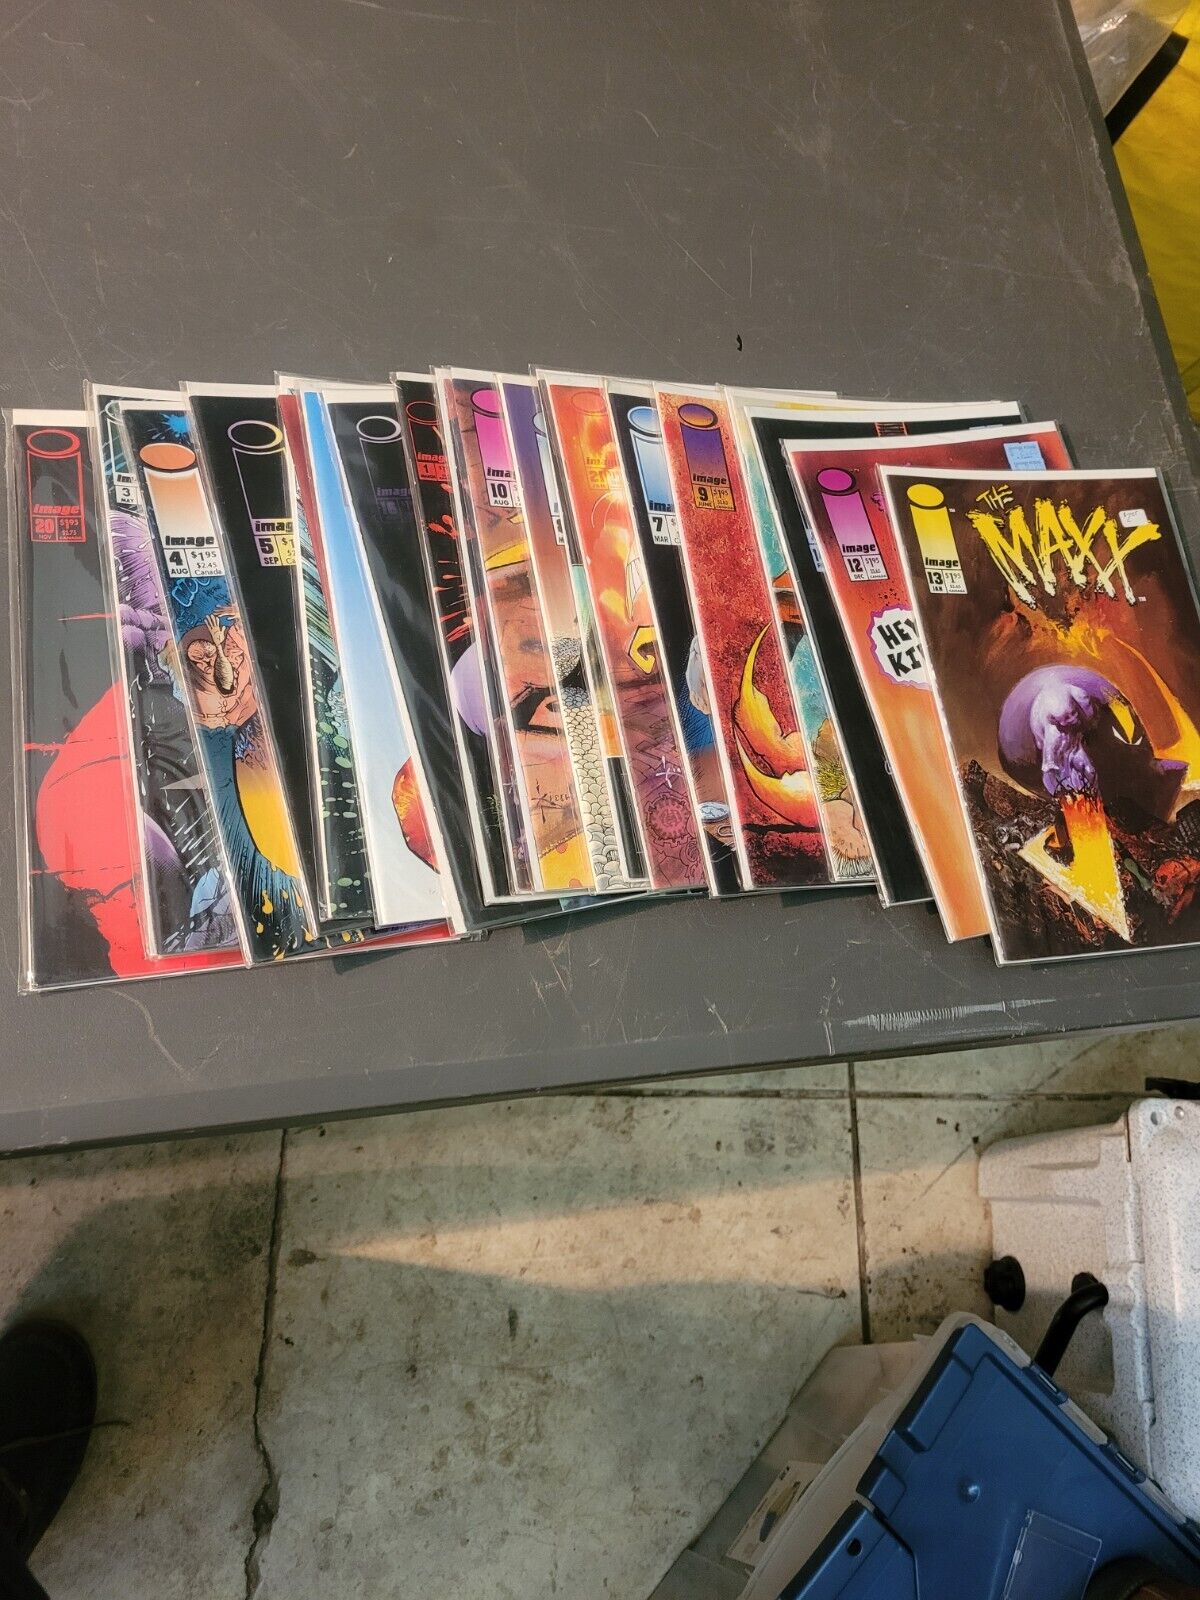 The Maxx Comic Book Bagged and Boarded Image Comics Lot Of 22